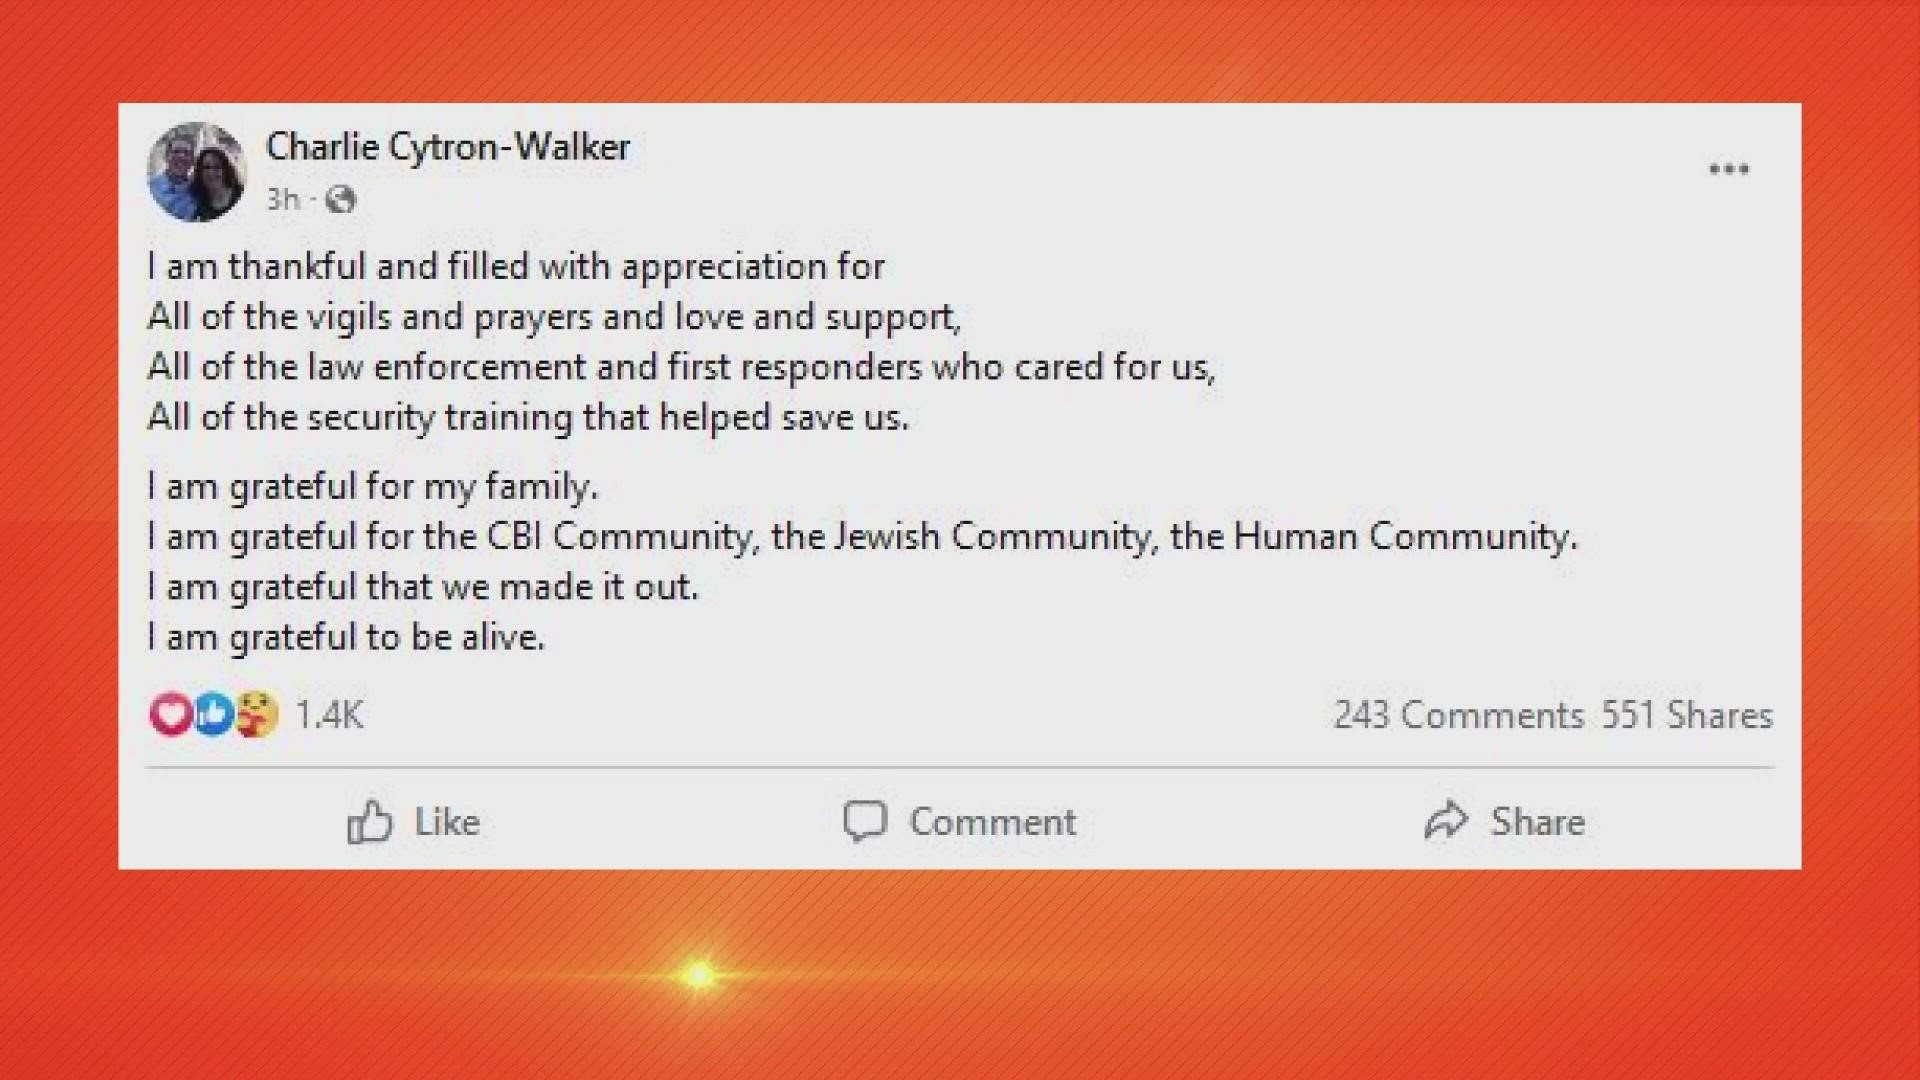 Charlie Cytron-Walker posted an update on his public Facebook page early Sunday morning, thanking law enforcement and the prayers and support from the community.